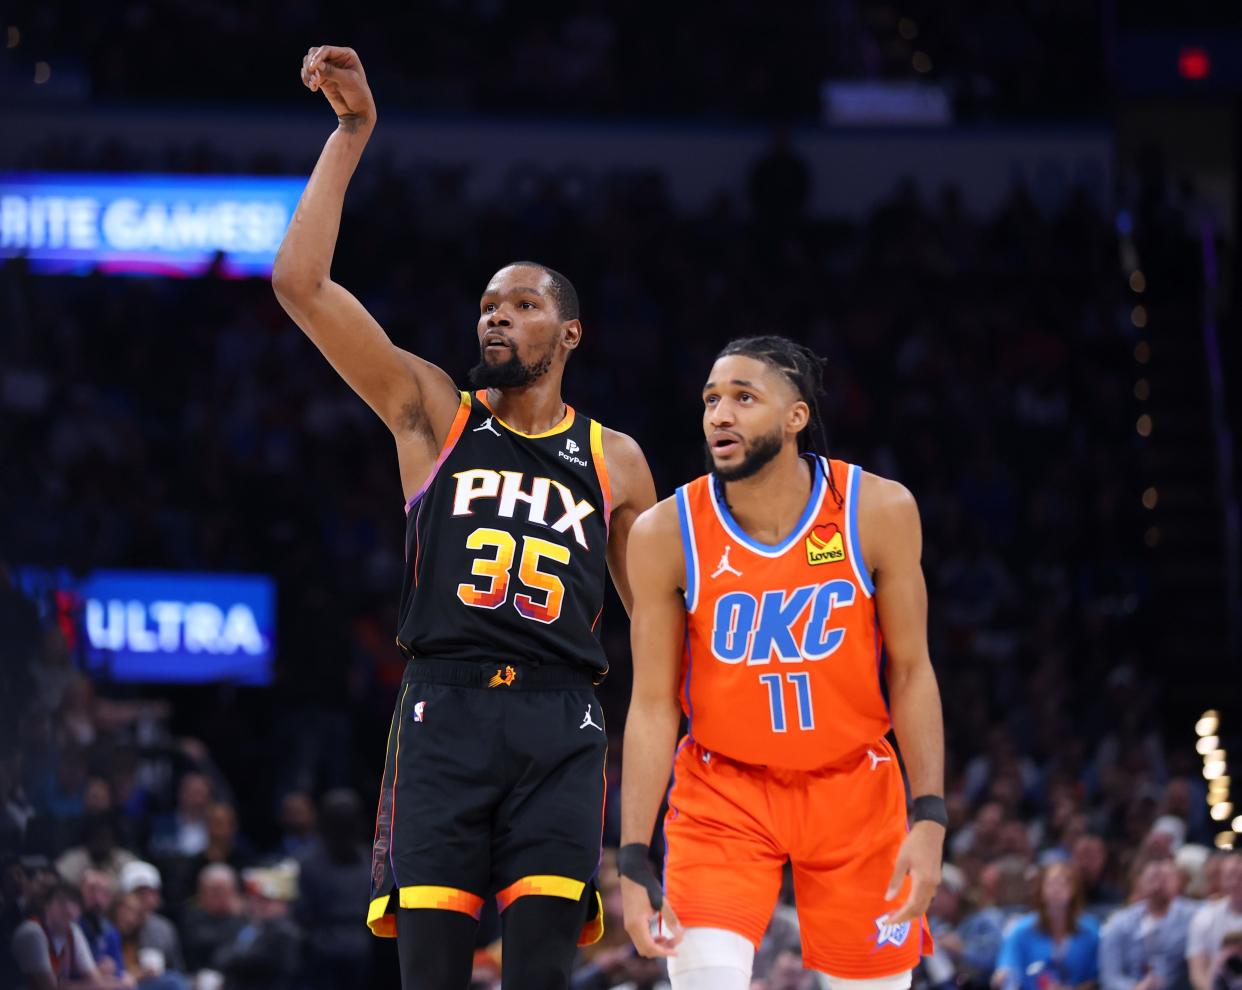 Phoenix's Kevin Durant, left, keeps his hand raised after a 3-point basket next to Oklahoma City's Isaiah Joe during Friday's game at Paycom Center.